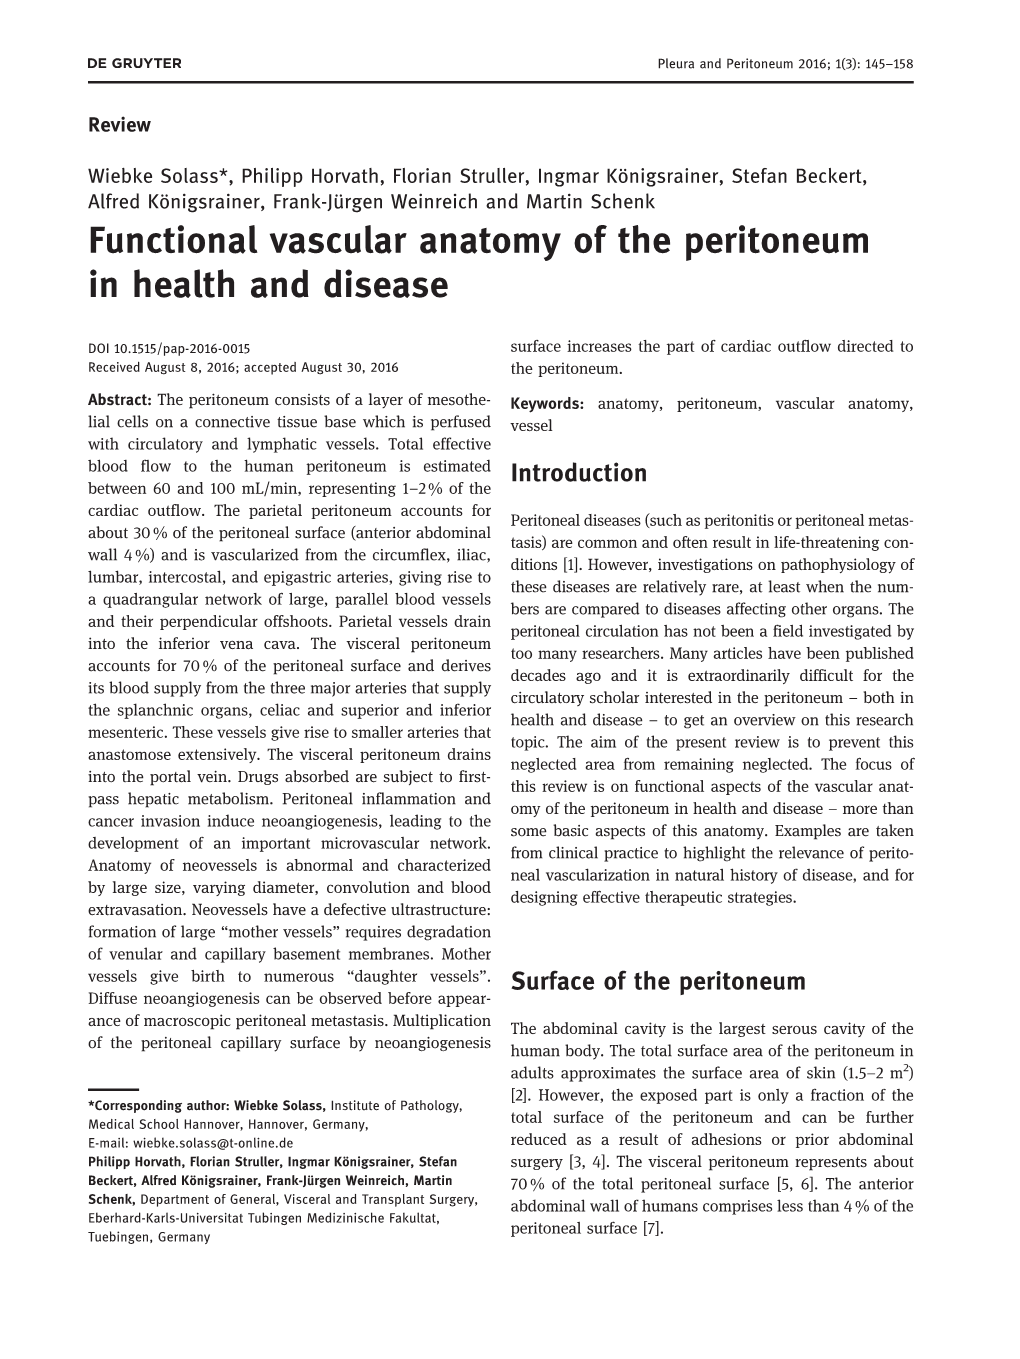 Functional Vascular Anatomy of the Peritoneum in Health and Disease